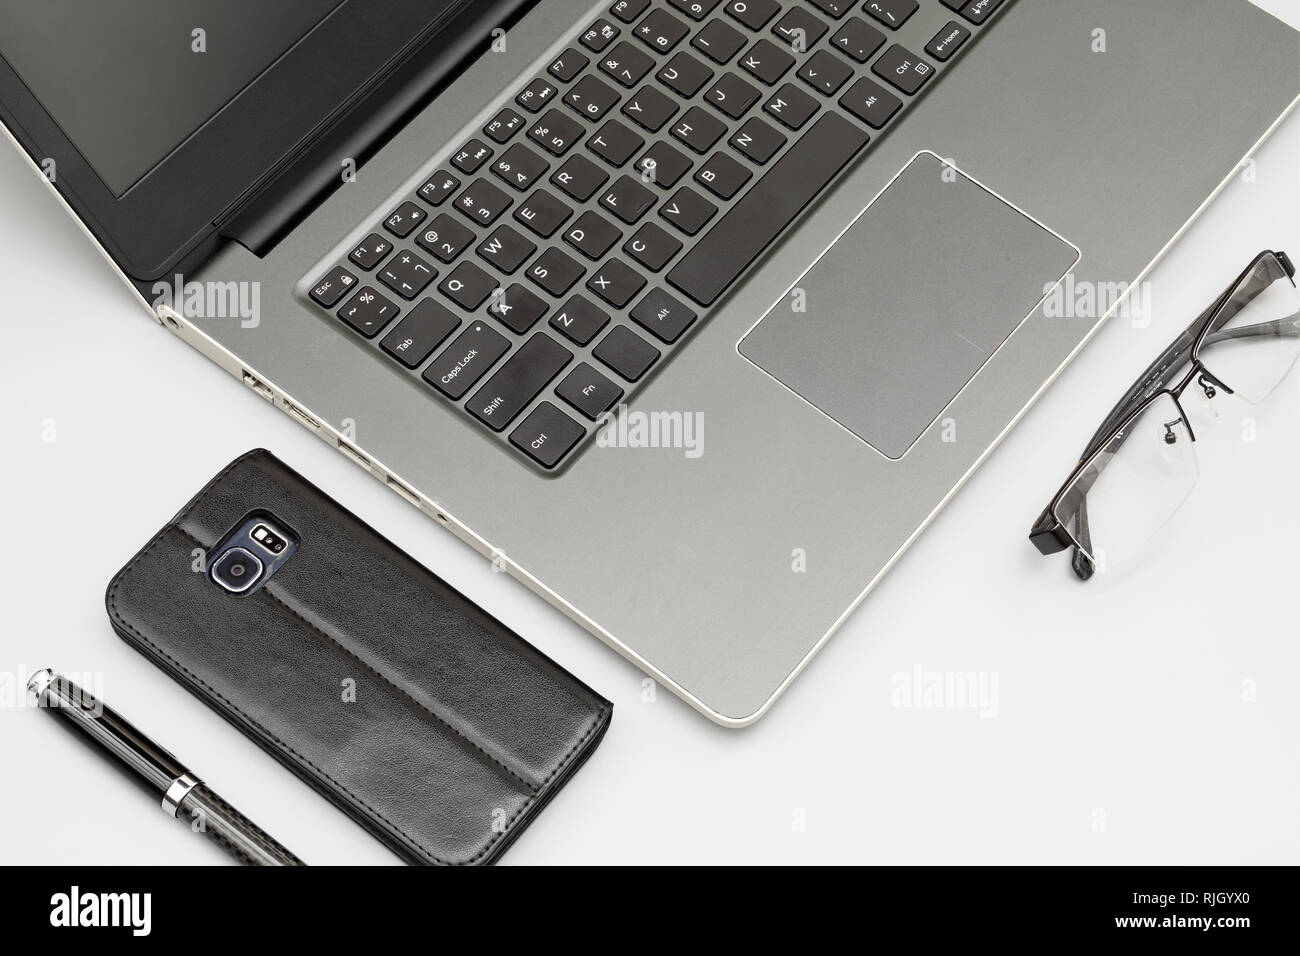 Workspace composition of laptop computer, smartphone pen, and folded glasses on office desk table background.  Stacked focus image. Stock Photo